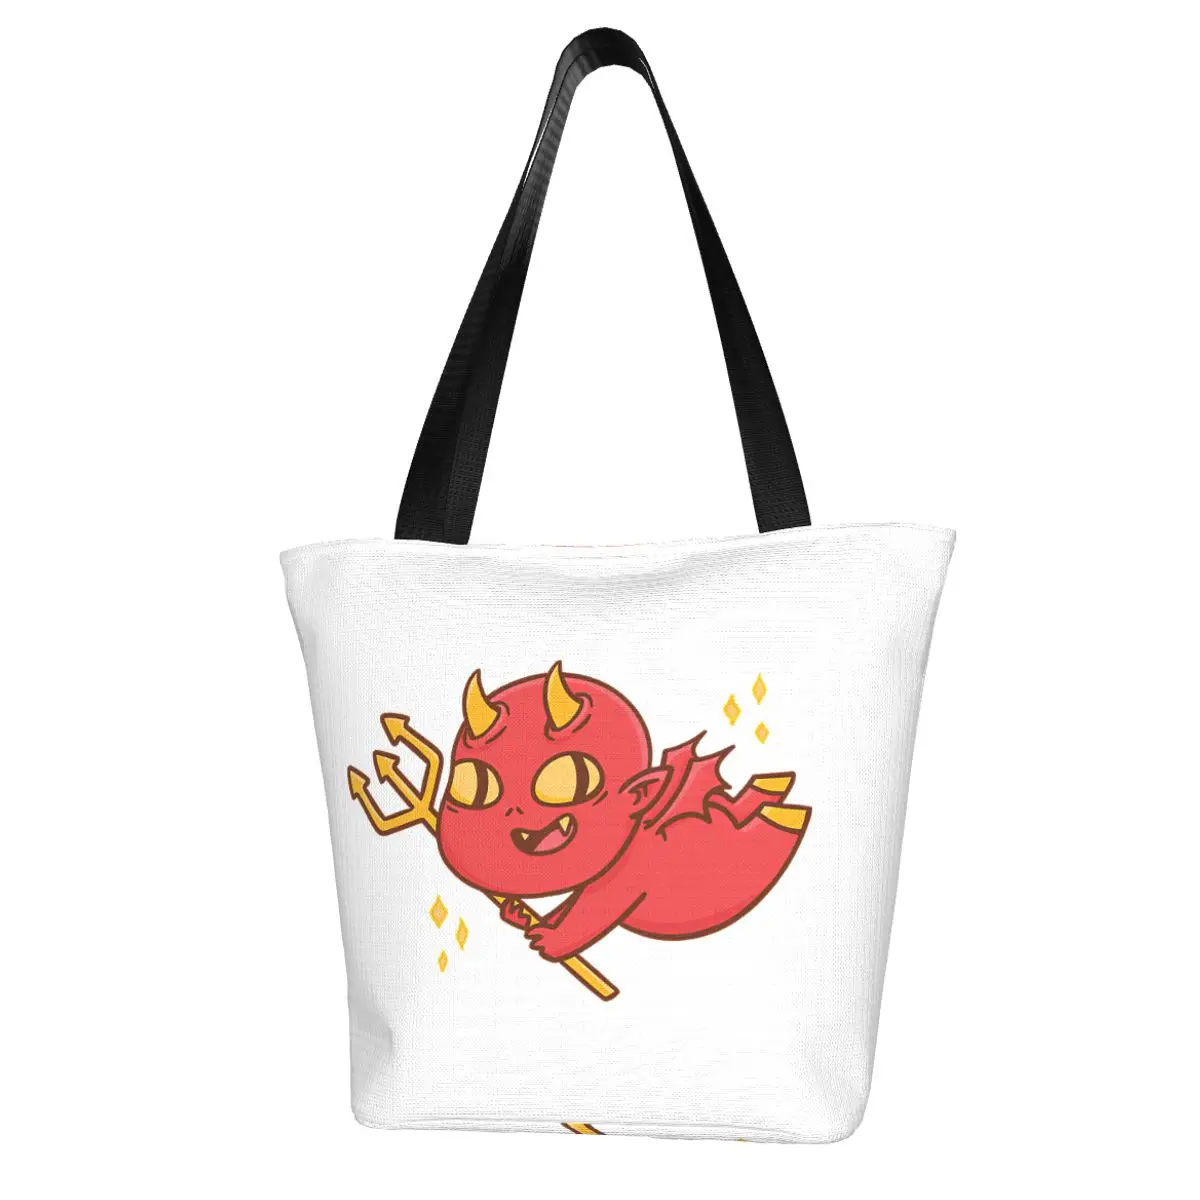 Chunk Baby Devil Cartoon With Fork And Horns Shopping Bag Aesthetic Cloth Outdoor Handbag Female Fashion Bags